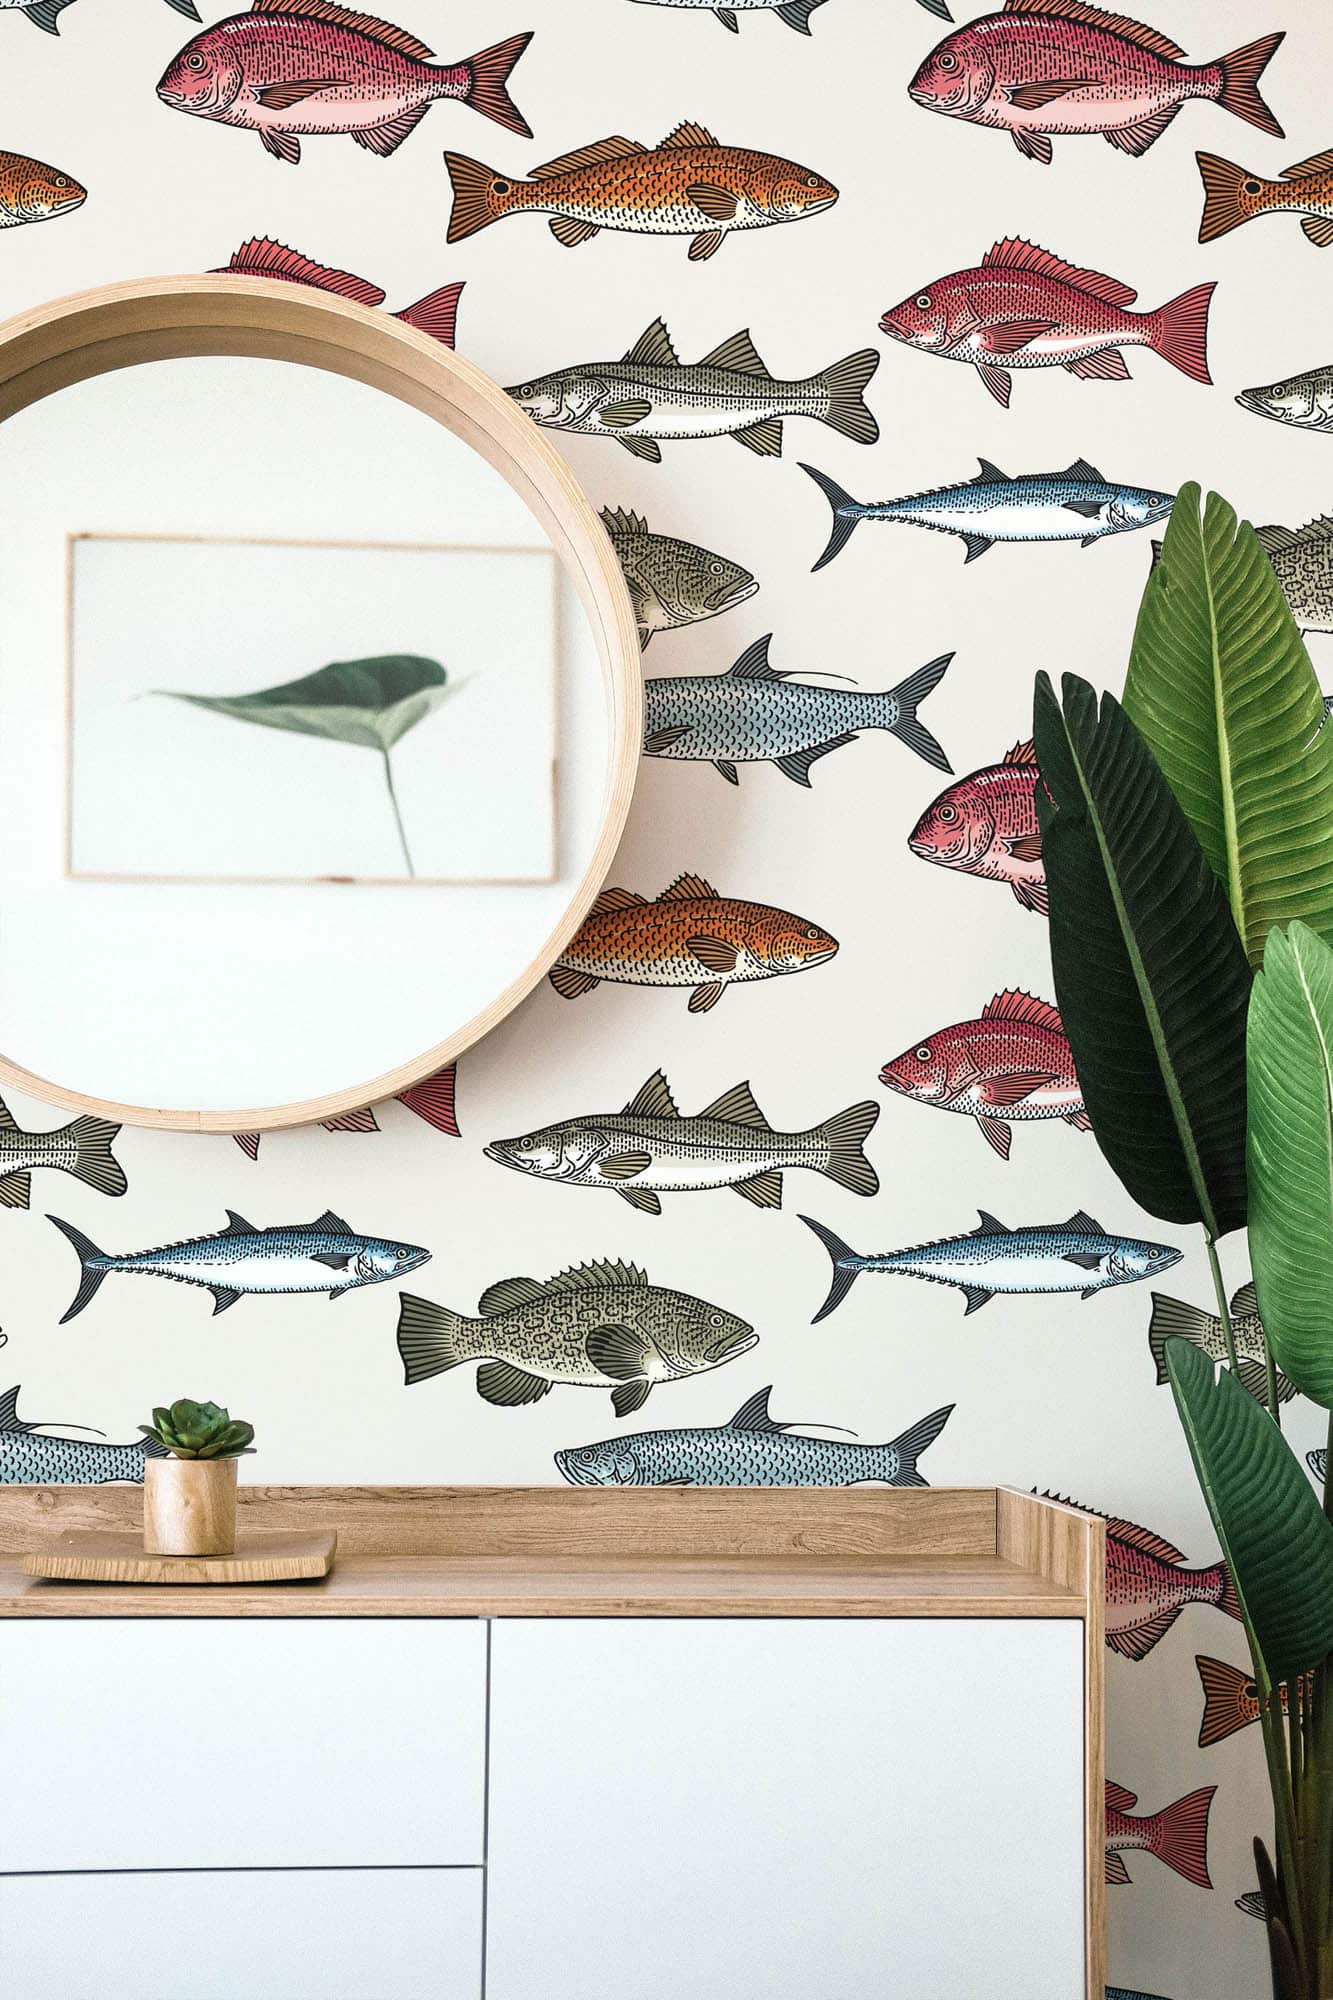 Fish wallpaper - Peel and Stick or Traditional